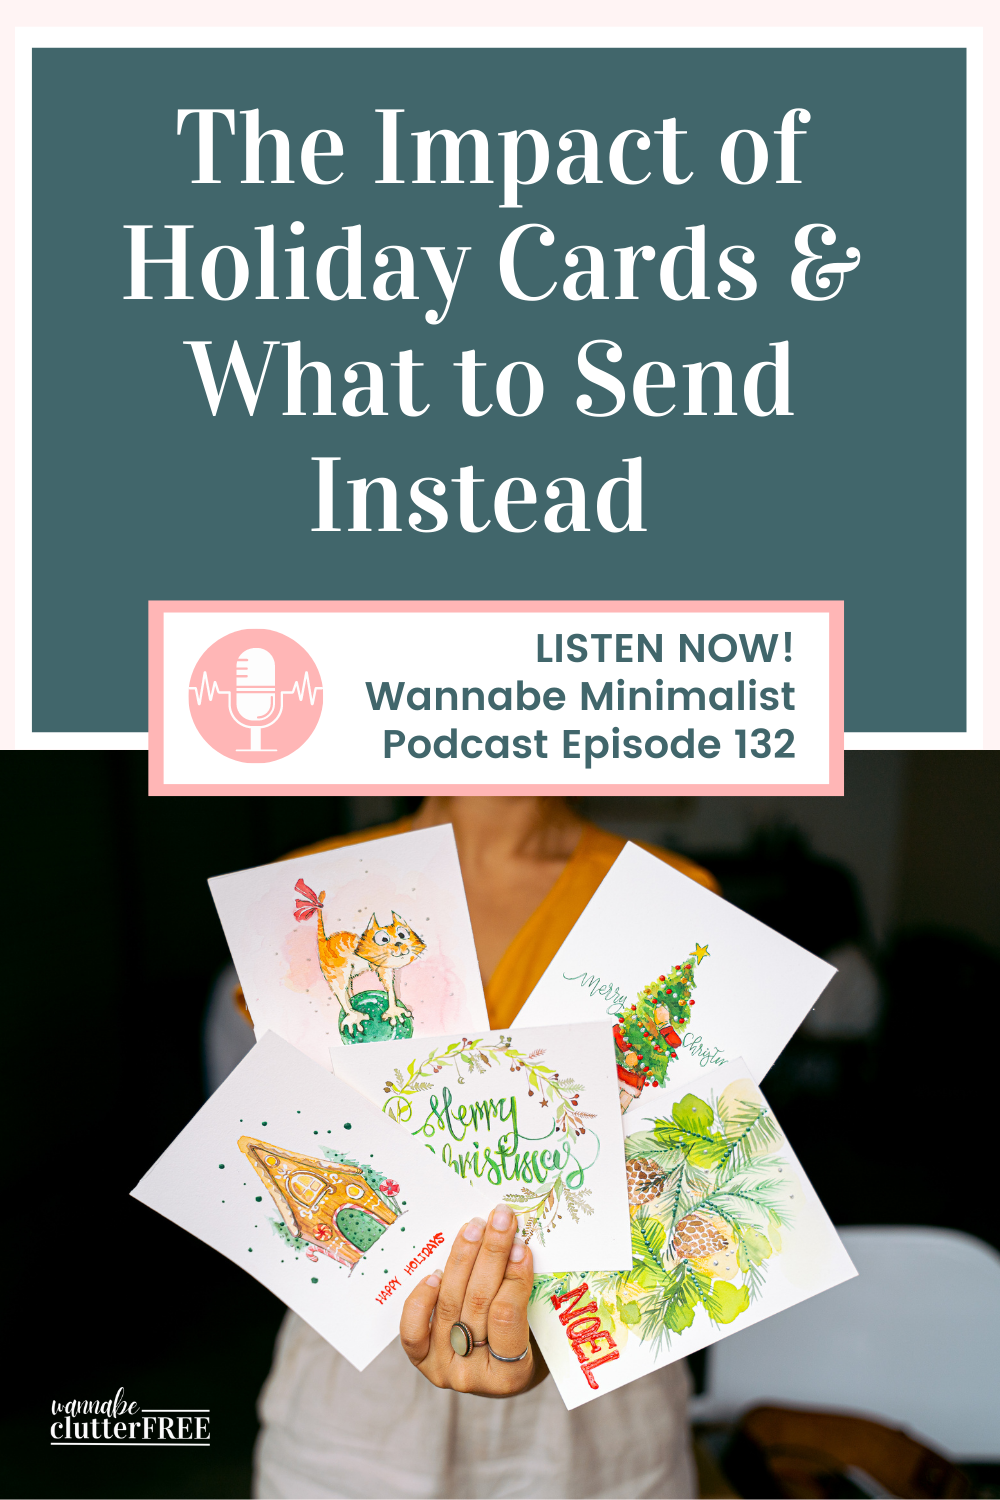 The Impact of Holiday Cards and What to Send Instead